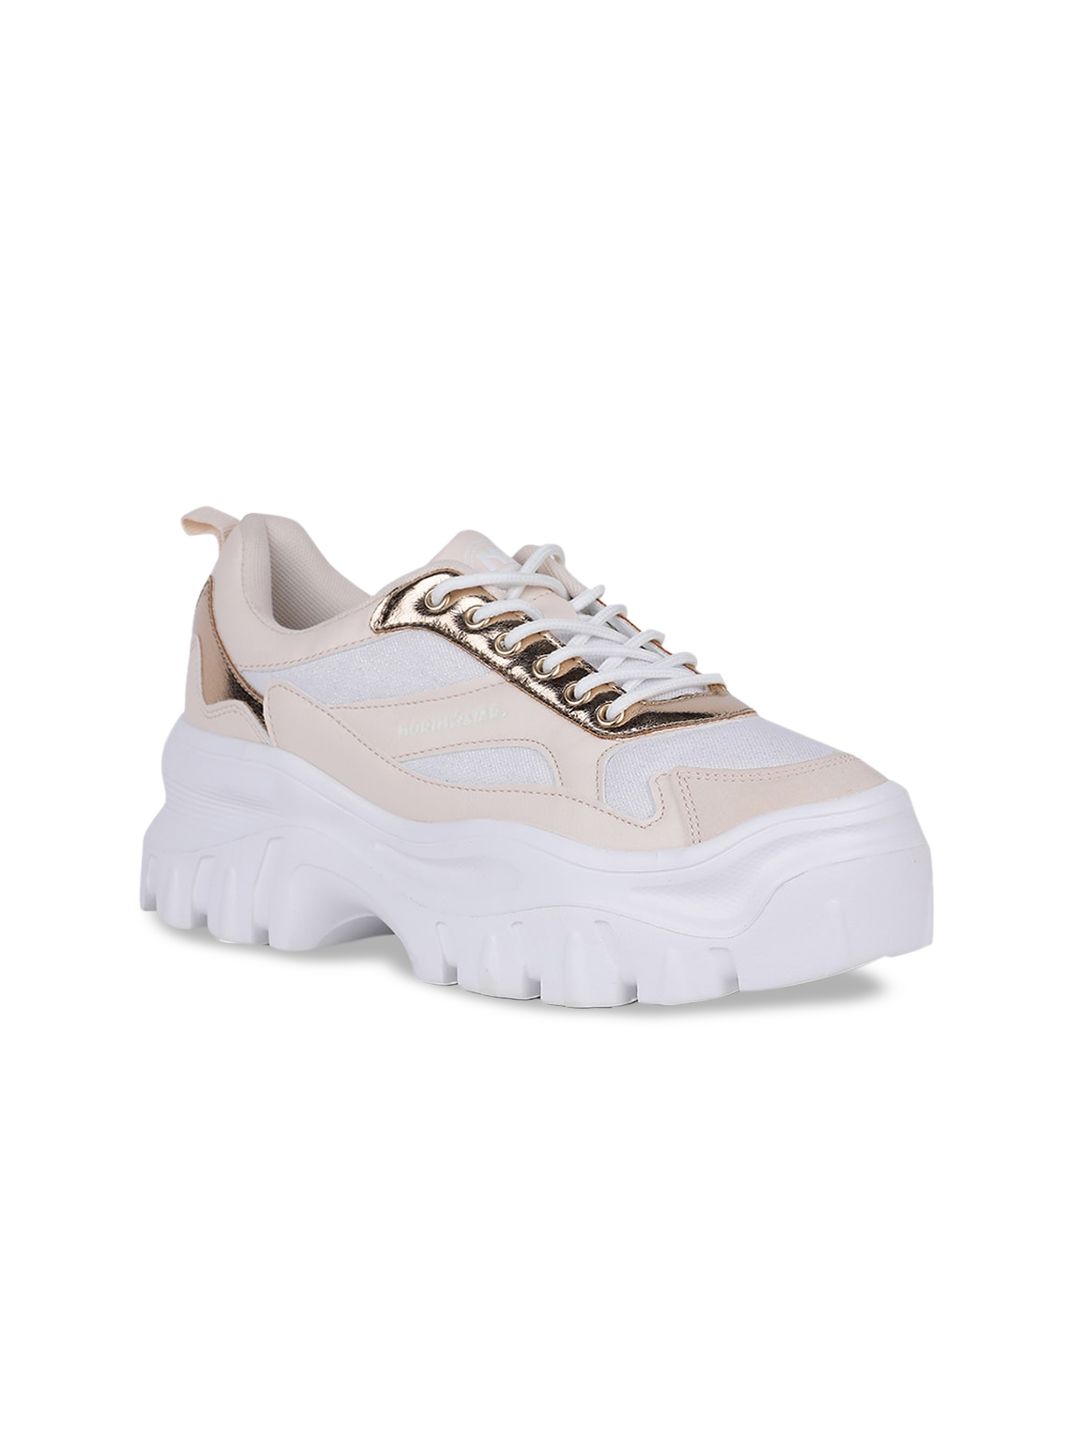 North Star Women Pink & Off-White Colourblocked Sneakers Price in India